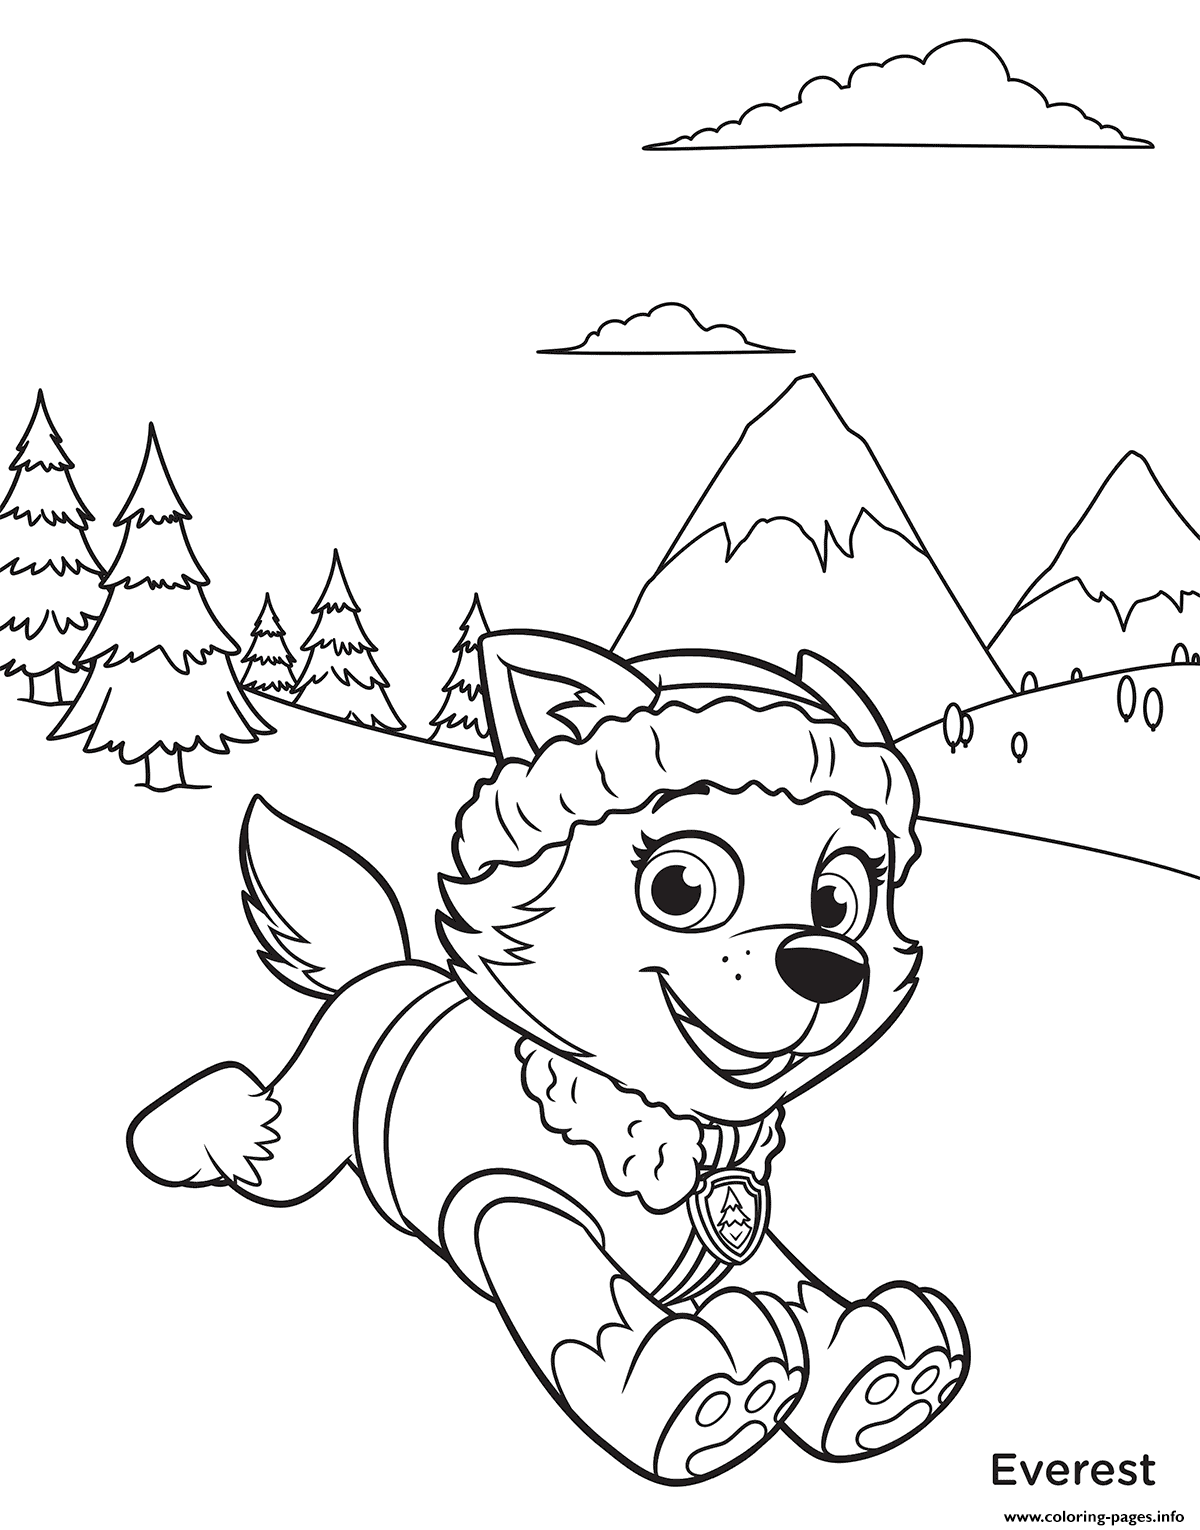 PAW Patrol Everest In Mountains Coloring Page Printable Coloring Home